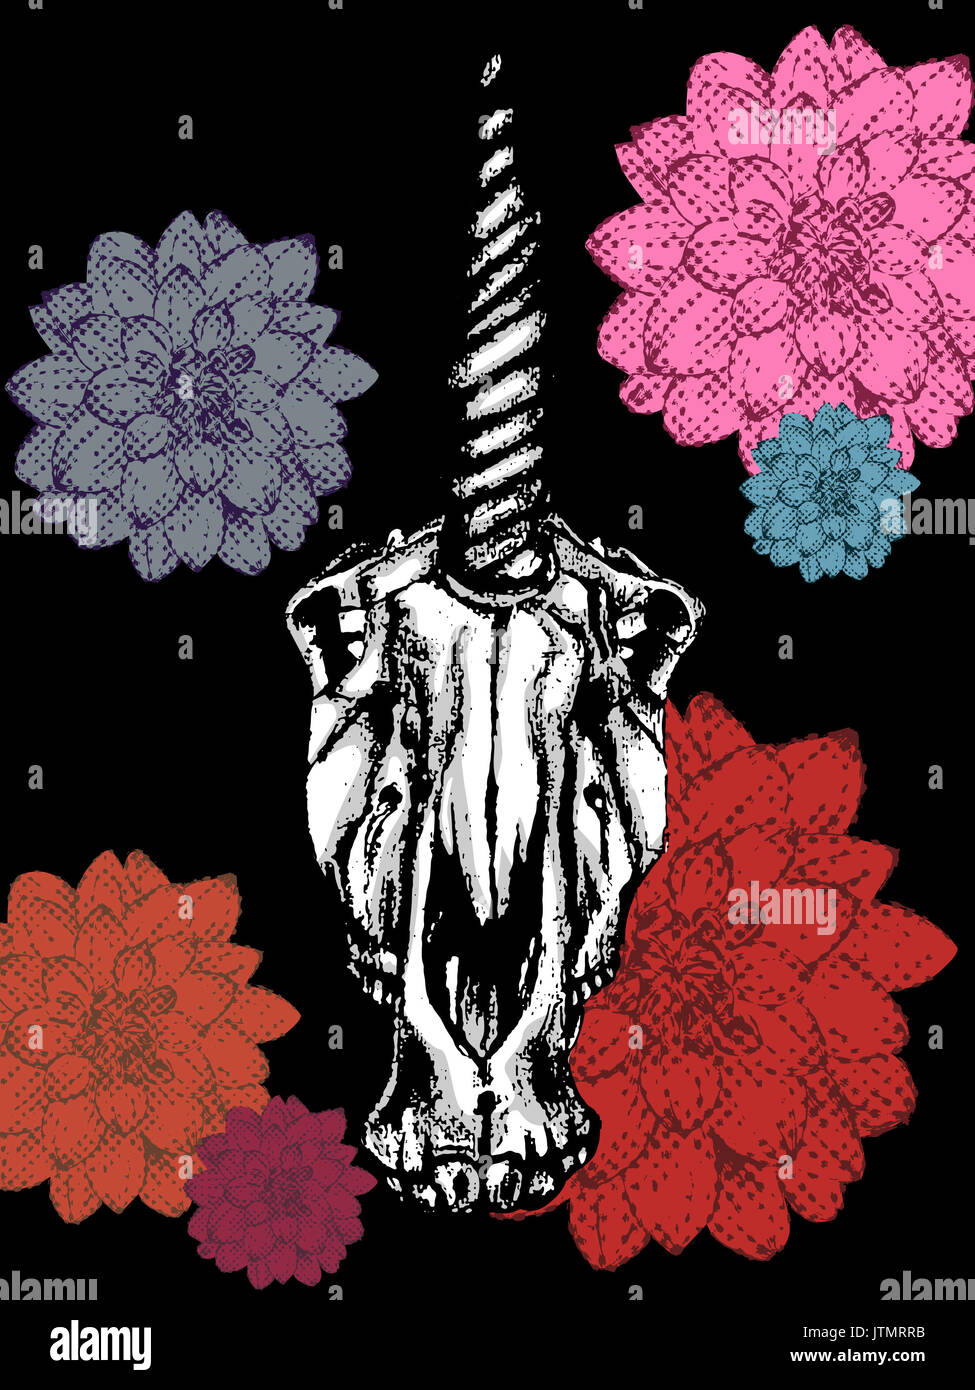 vector illustration of a hand drawn skull unicorn and colorful flowers on a black background Stock Photo